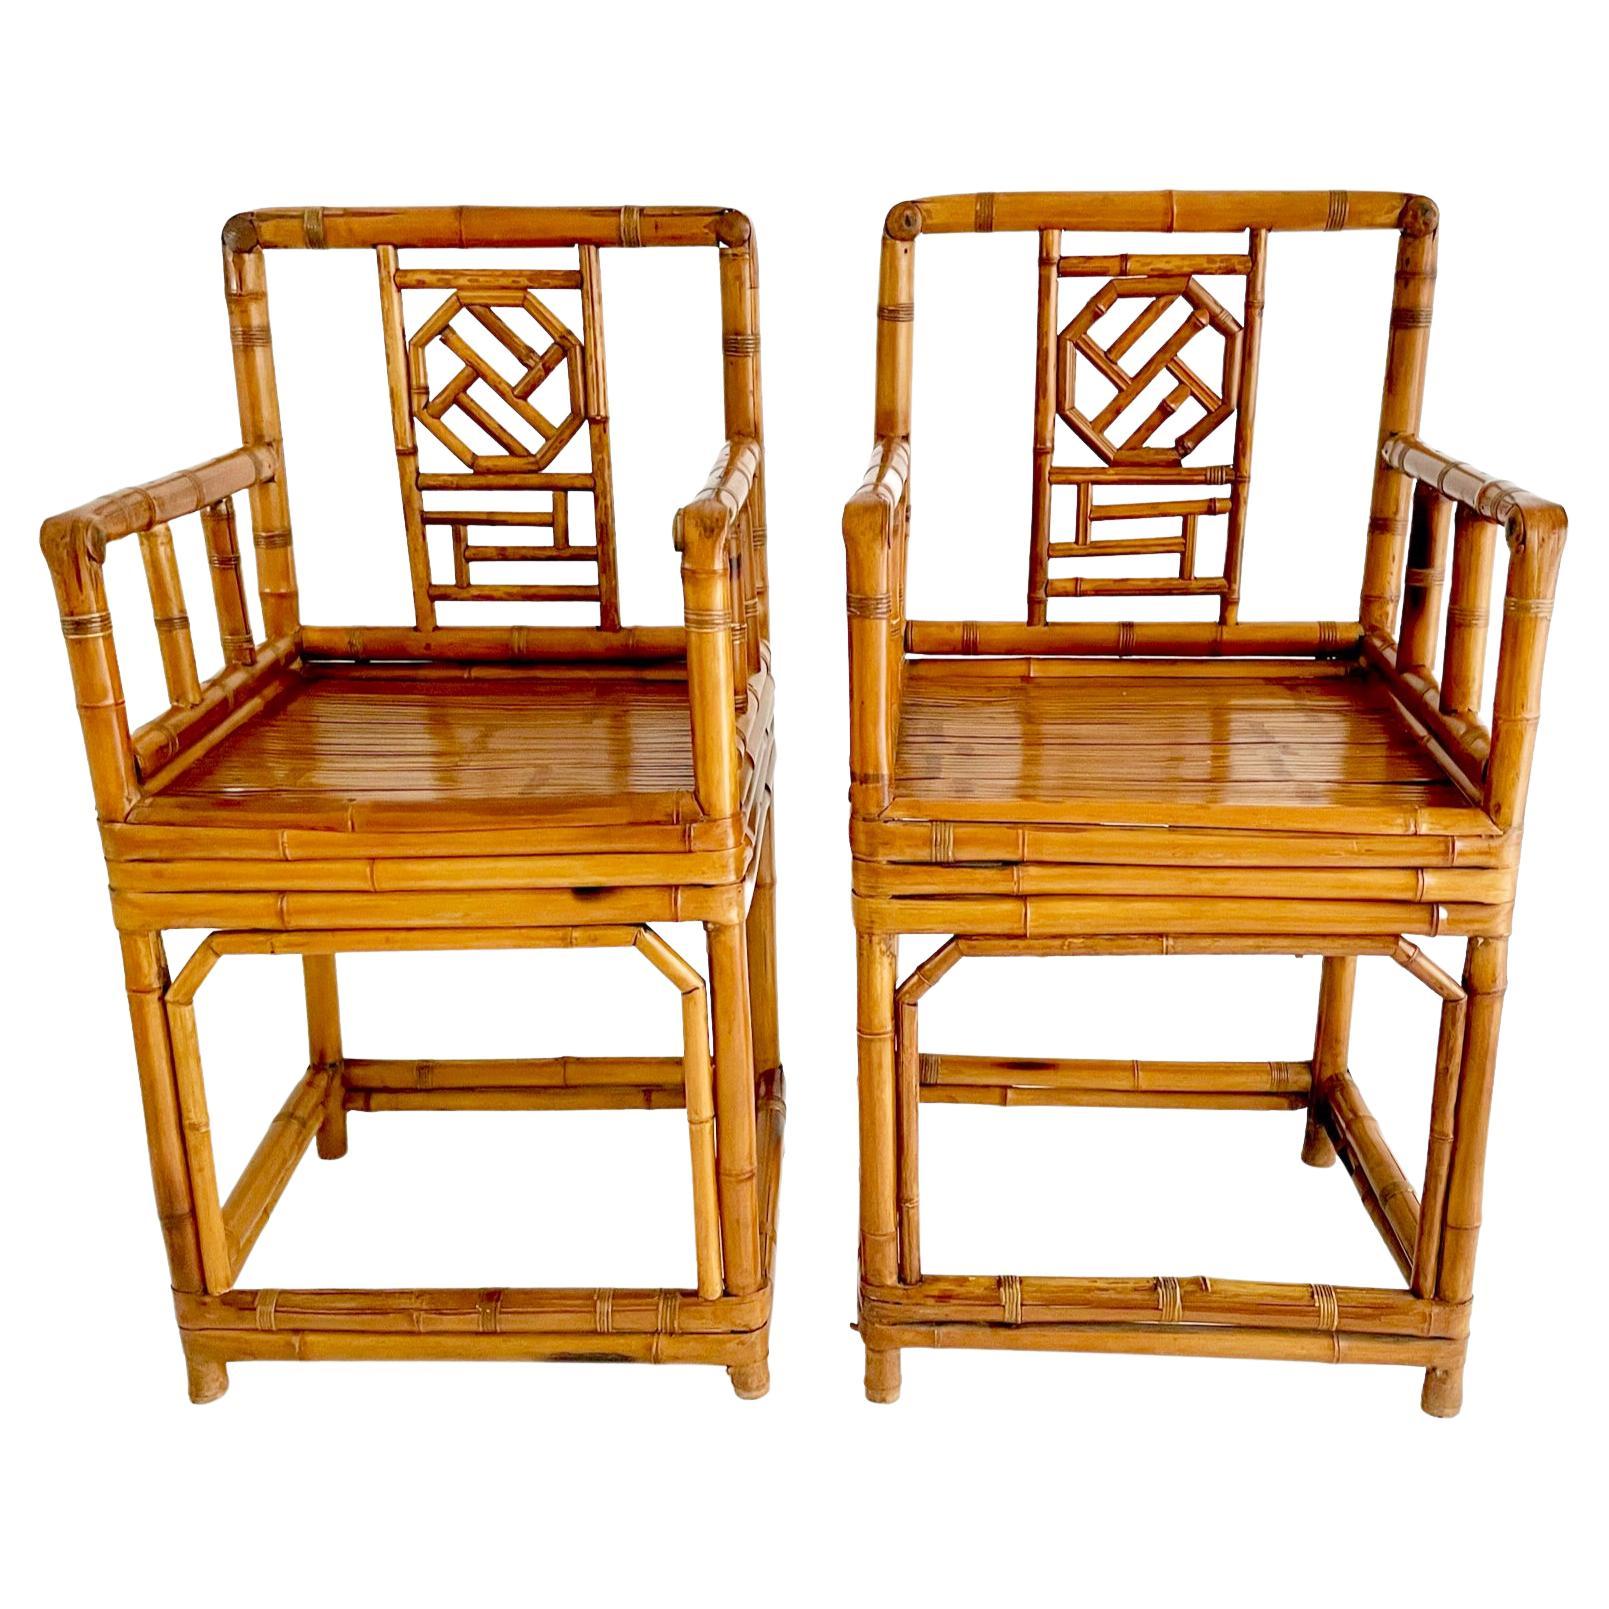 Pair of Early 20th Century Chinese Bamboo Chairs For Sale